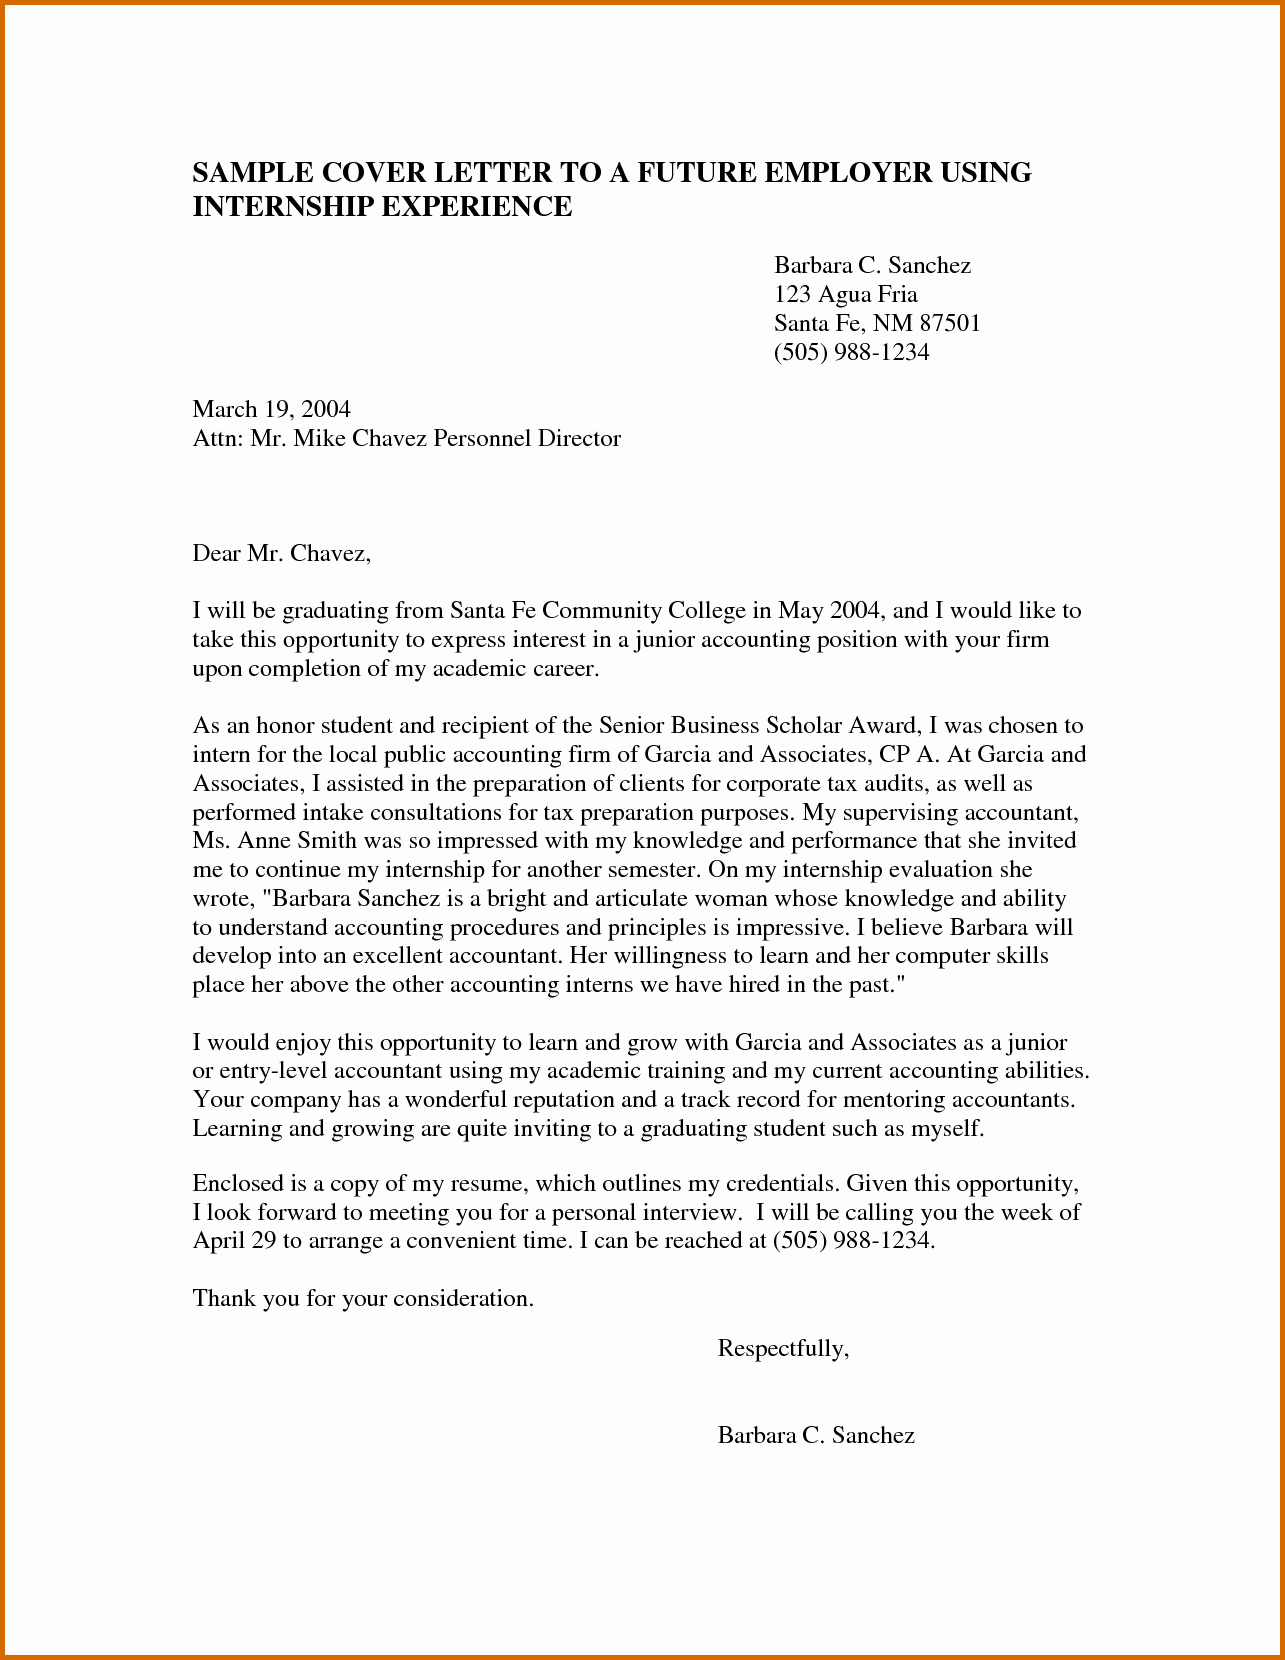 Help with Cover Letter for Internship